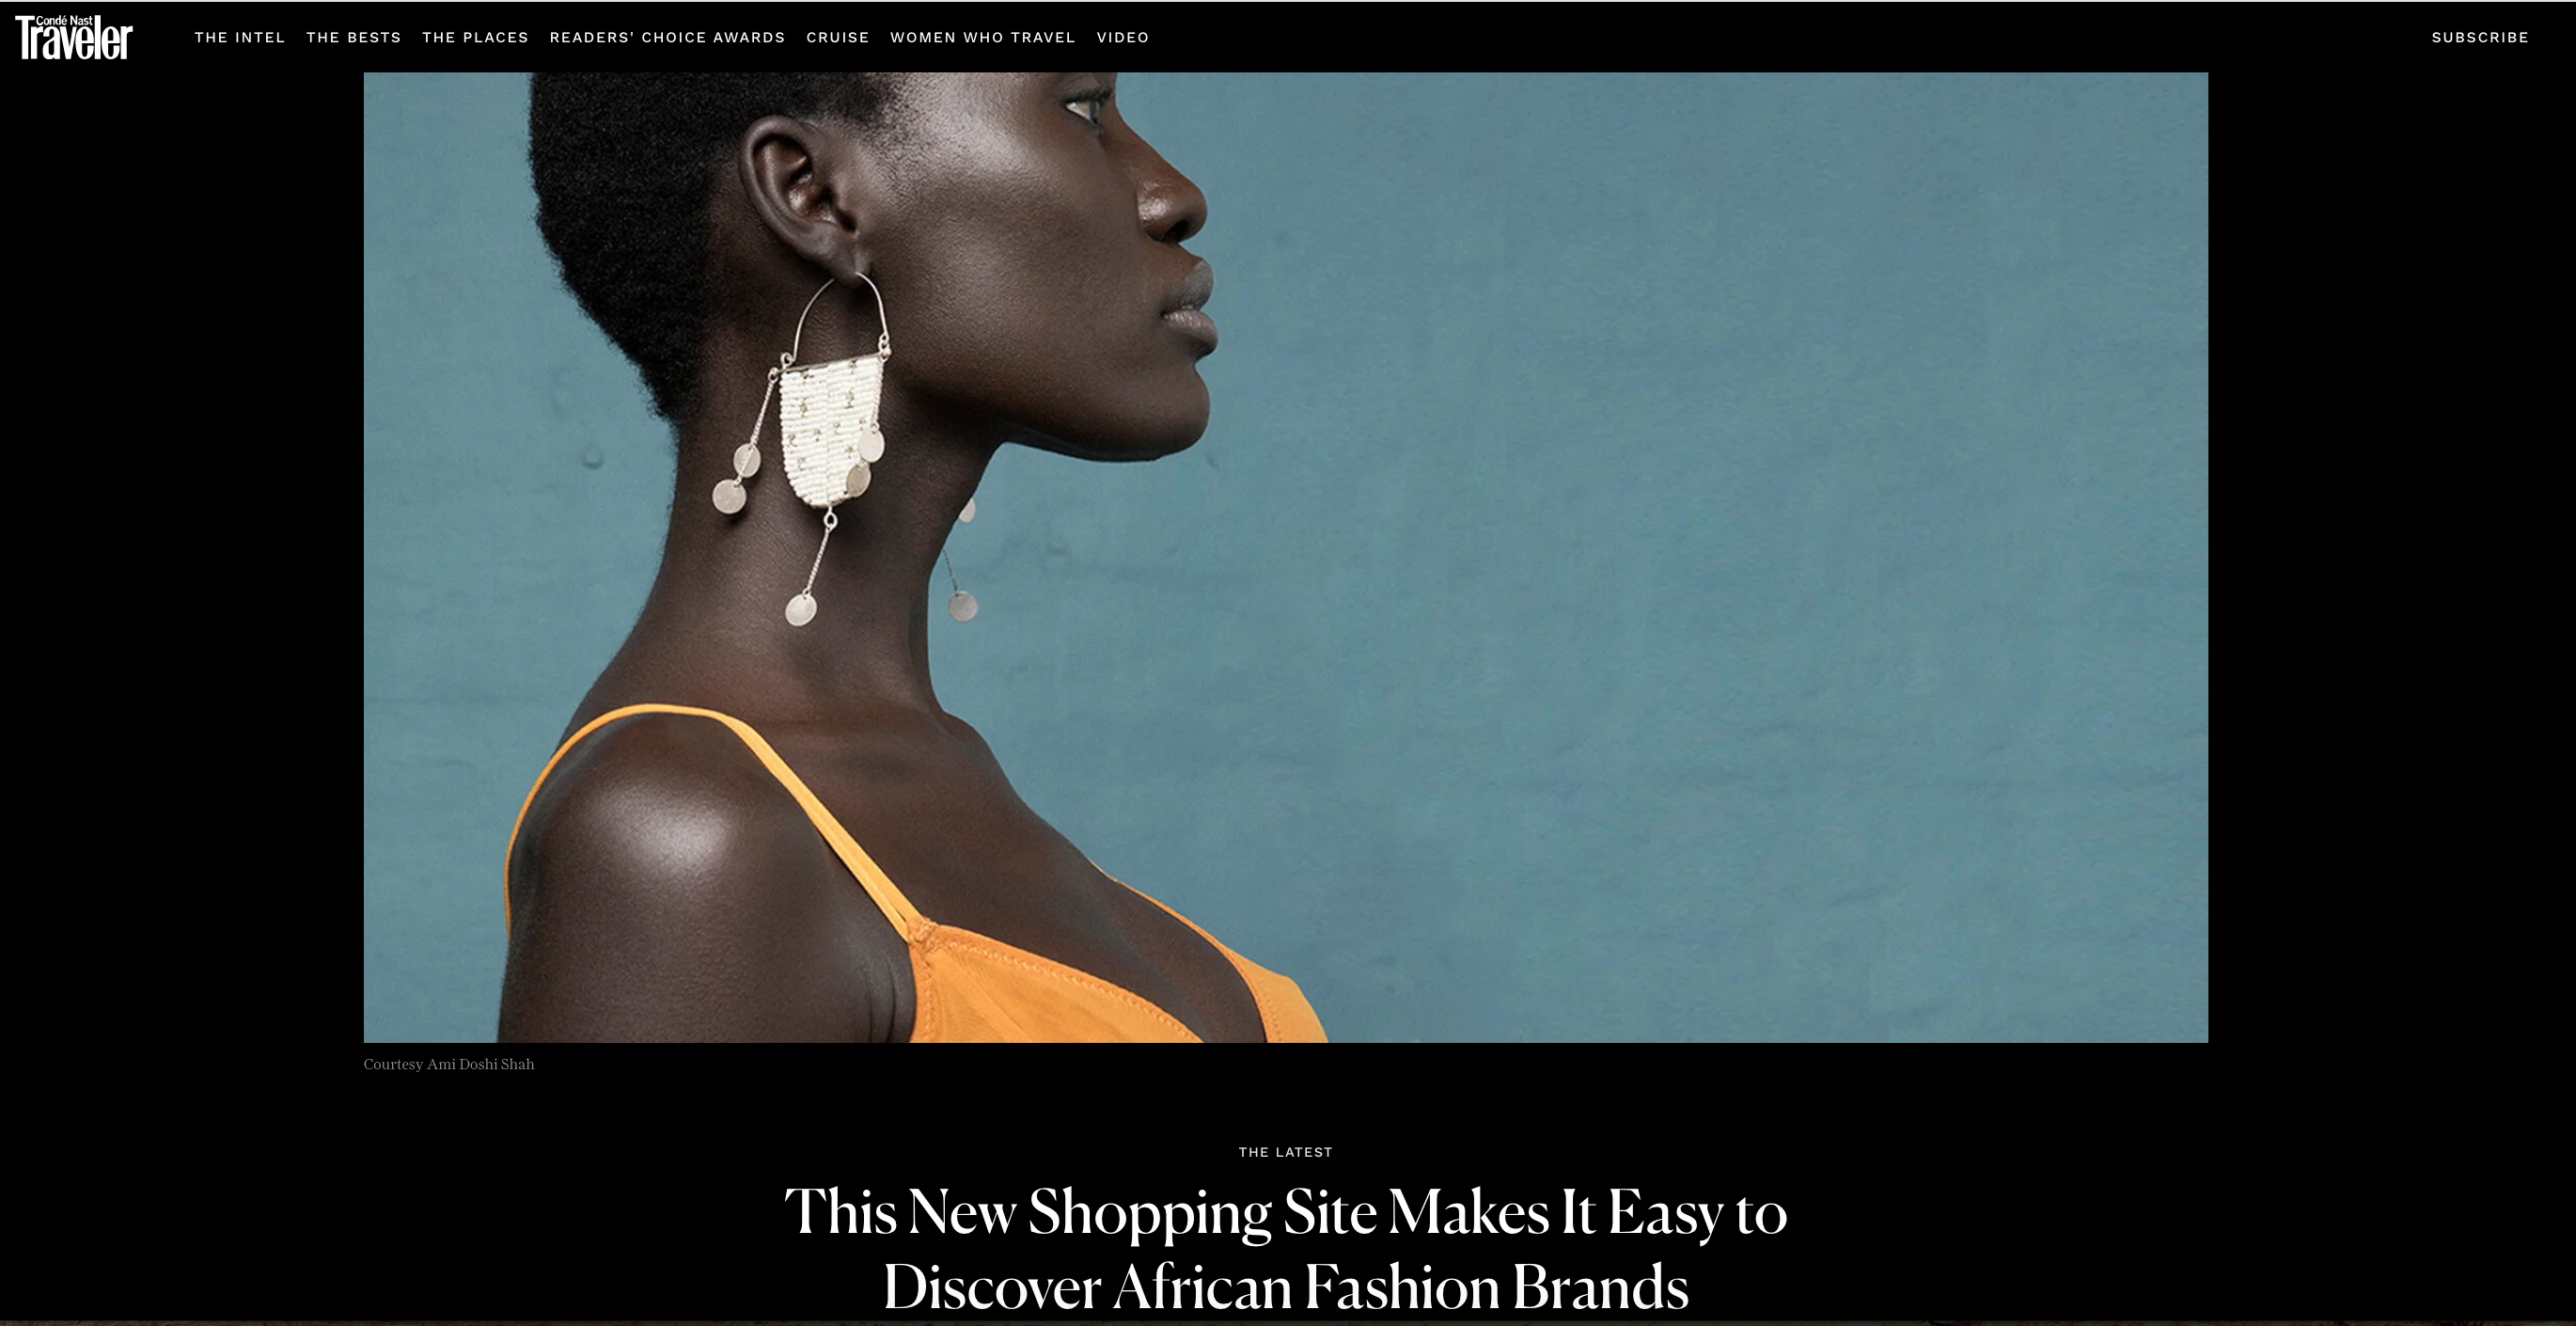 Condé Nast Traveler: This New Shopping Site Makes It Easy to Discover African Fashion Brands